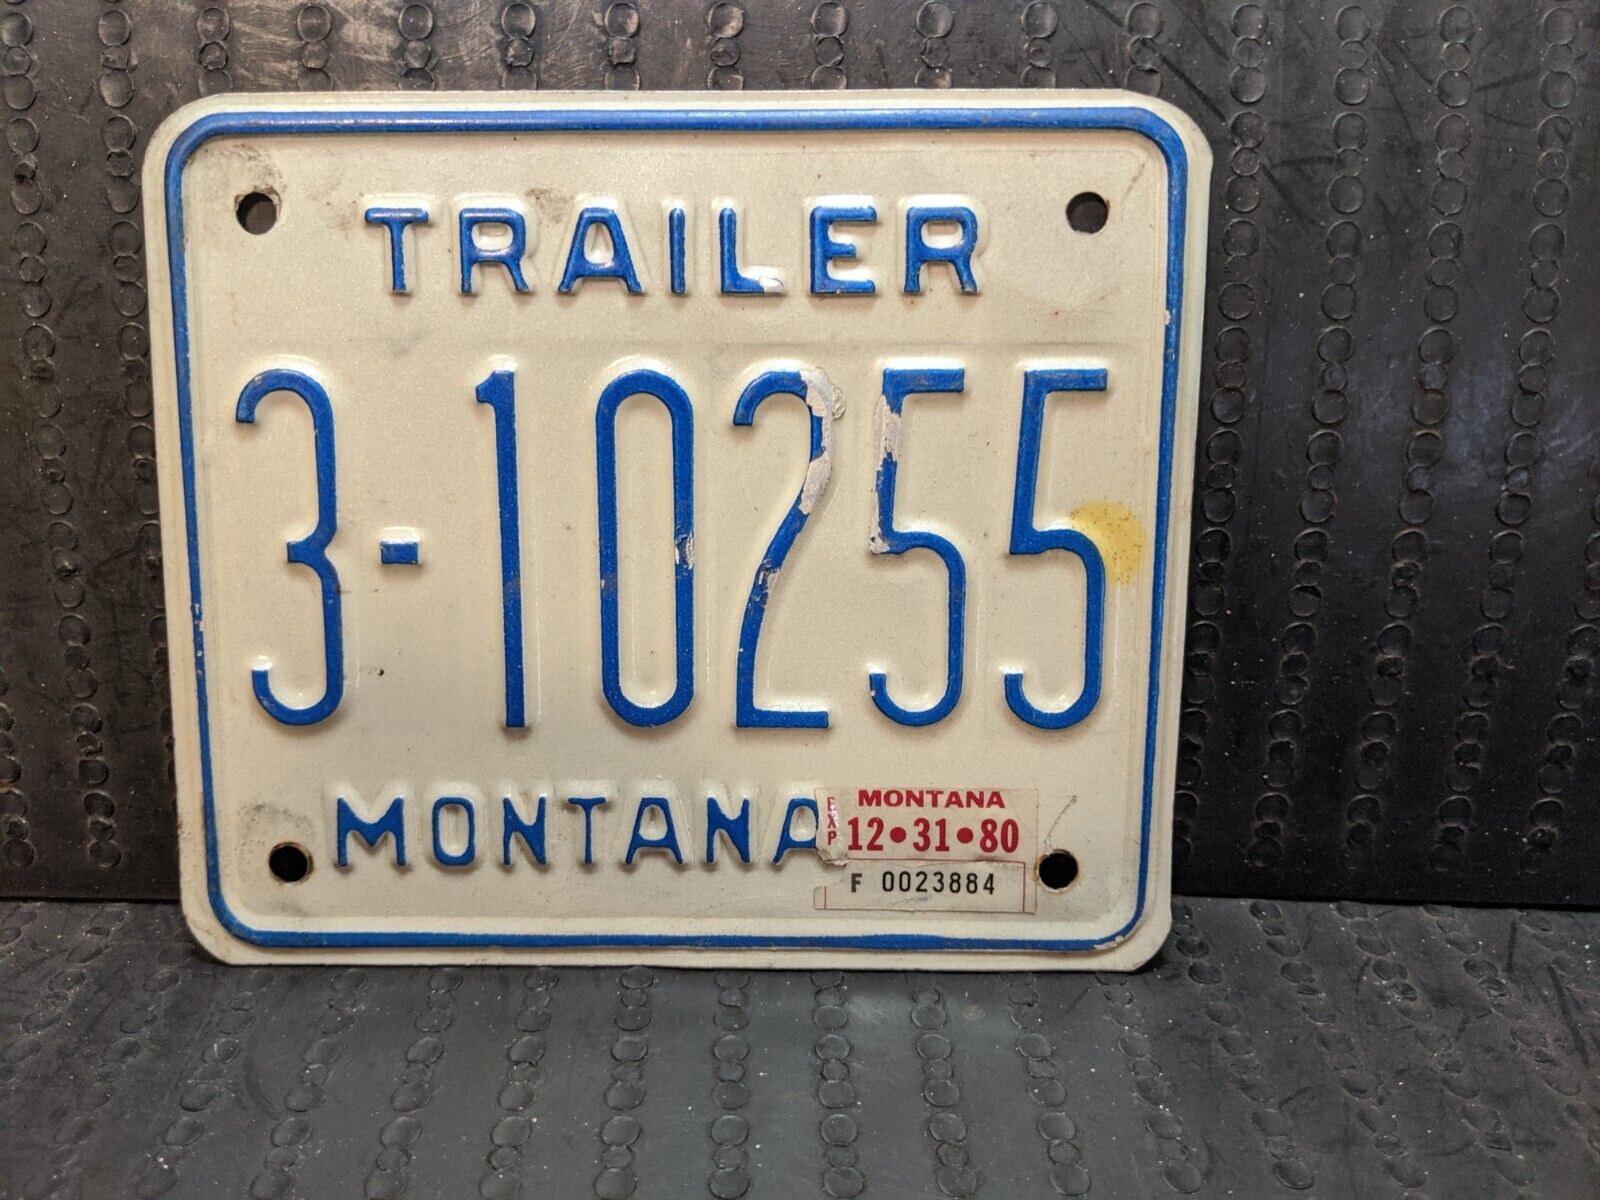 1976 MONTANA TRAILER LICENSE PLATE with 1980 STICKER ... (3 10255)